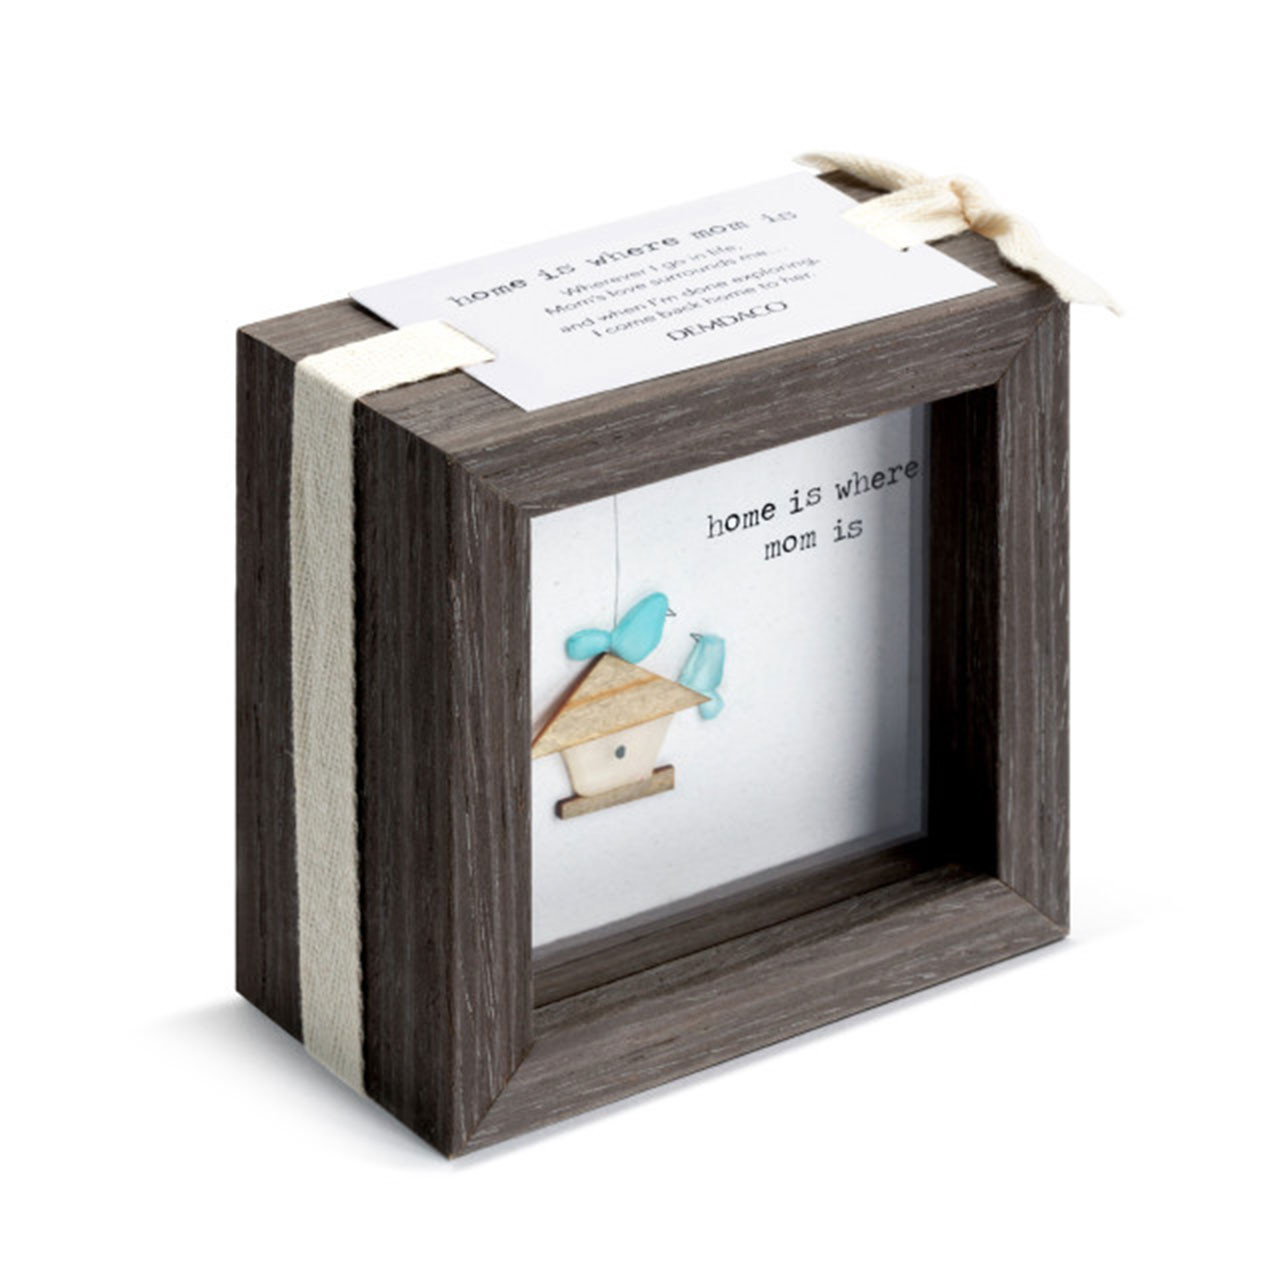 Packaging for the Home Is Where Mom Is Mini Plaque